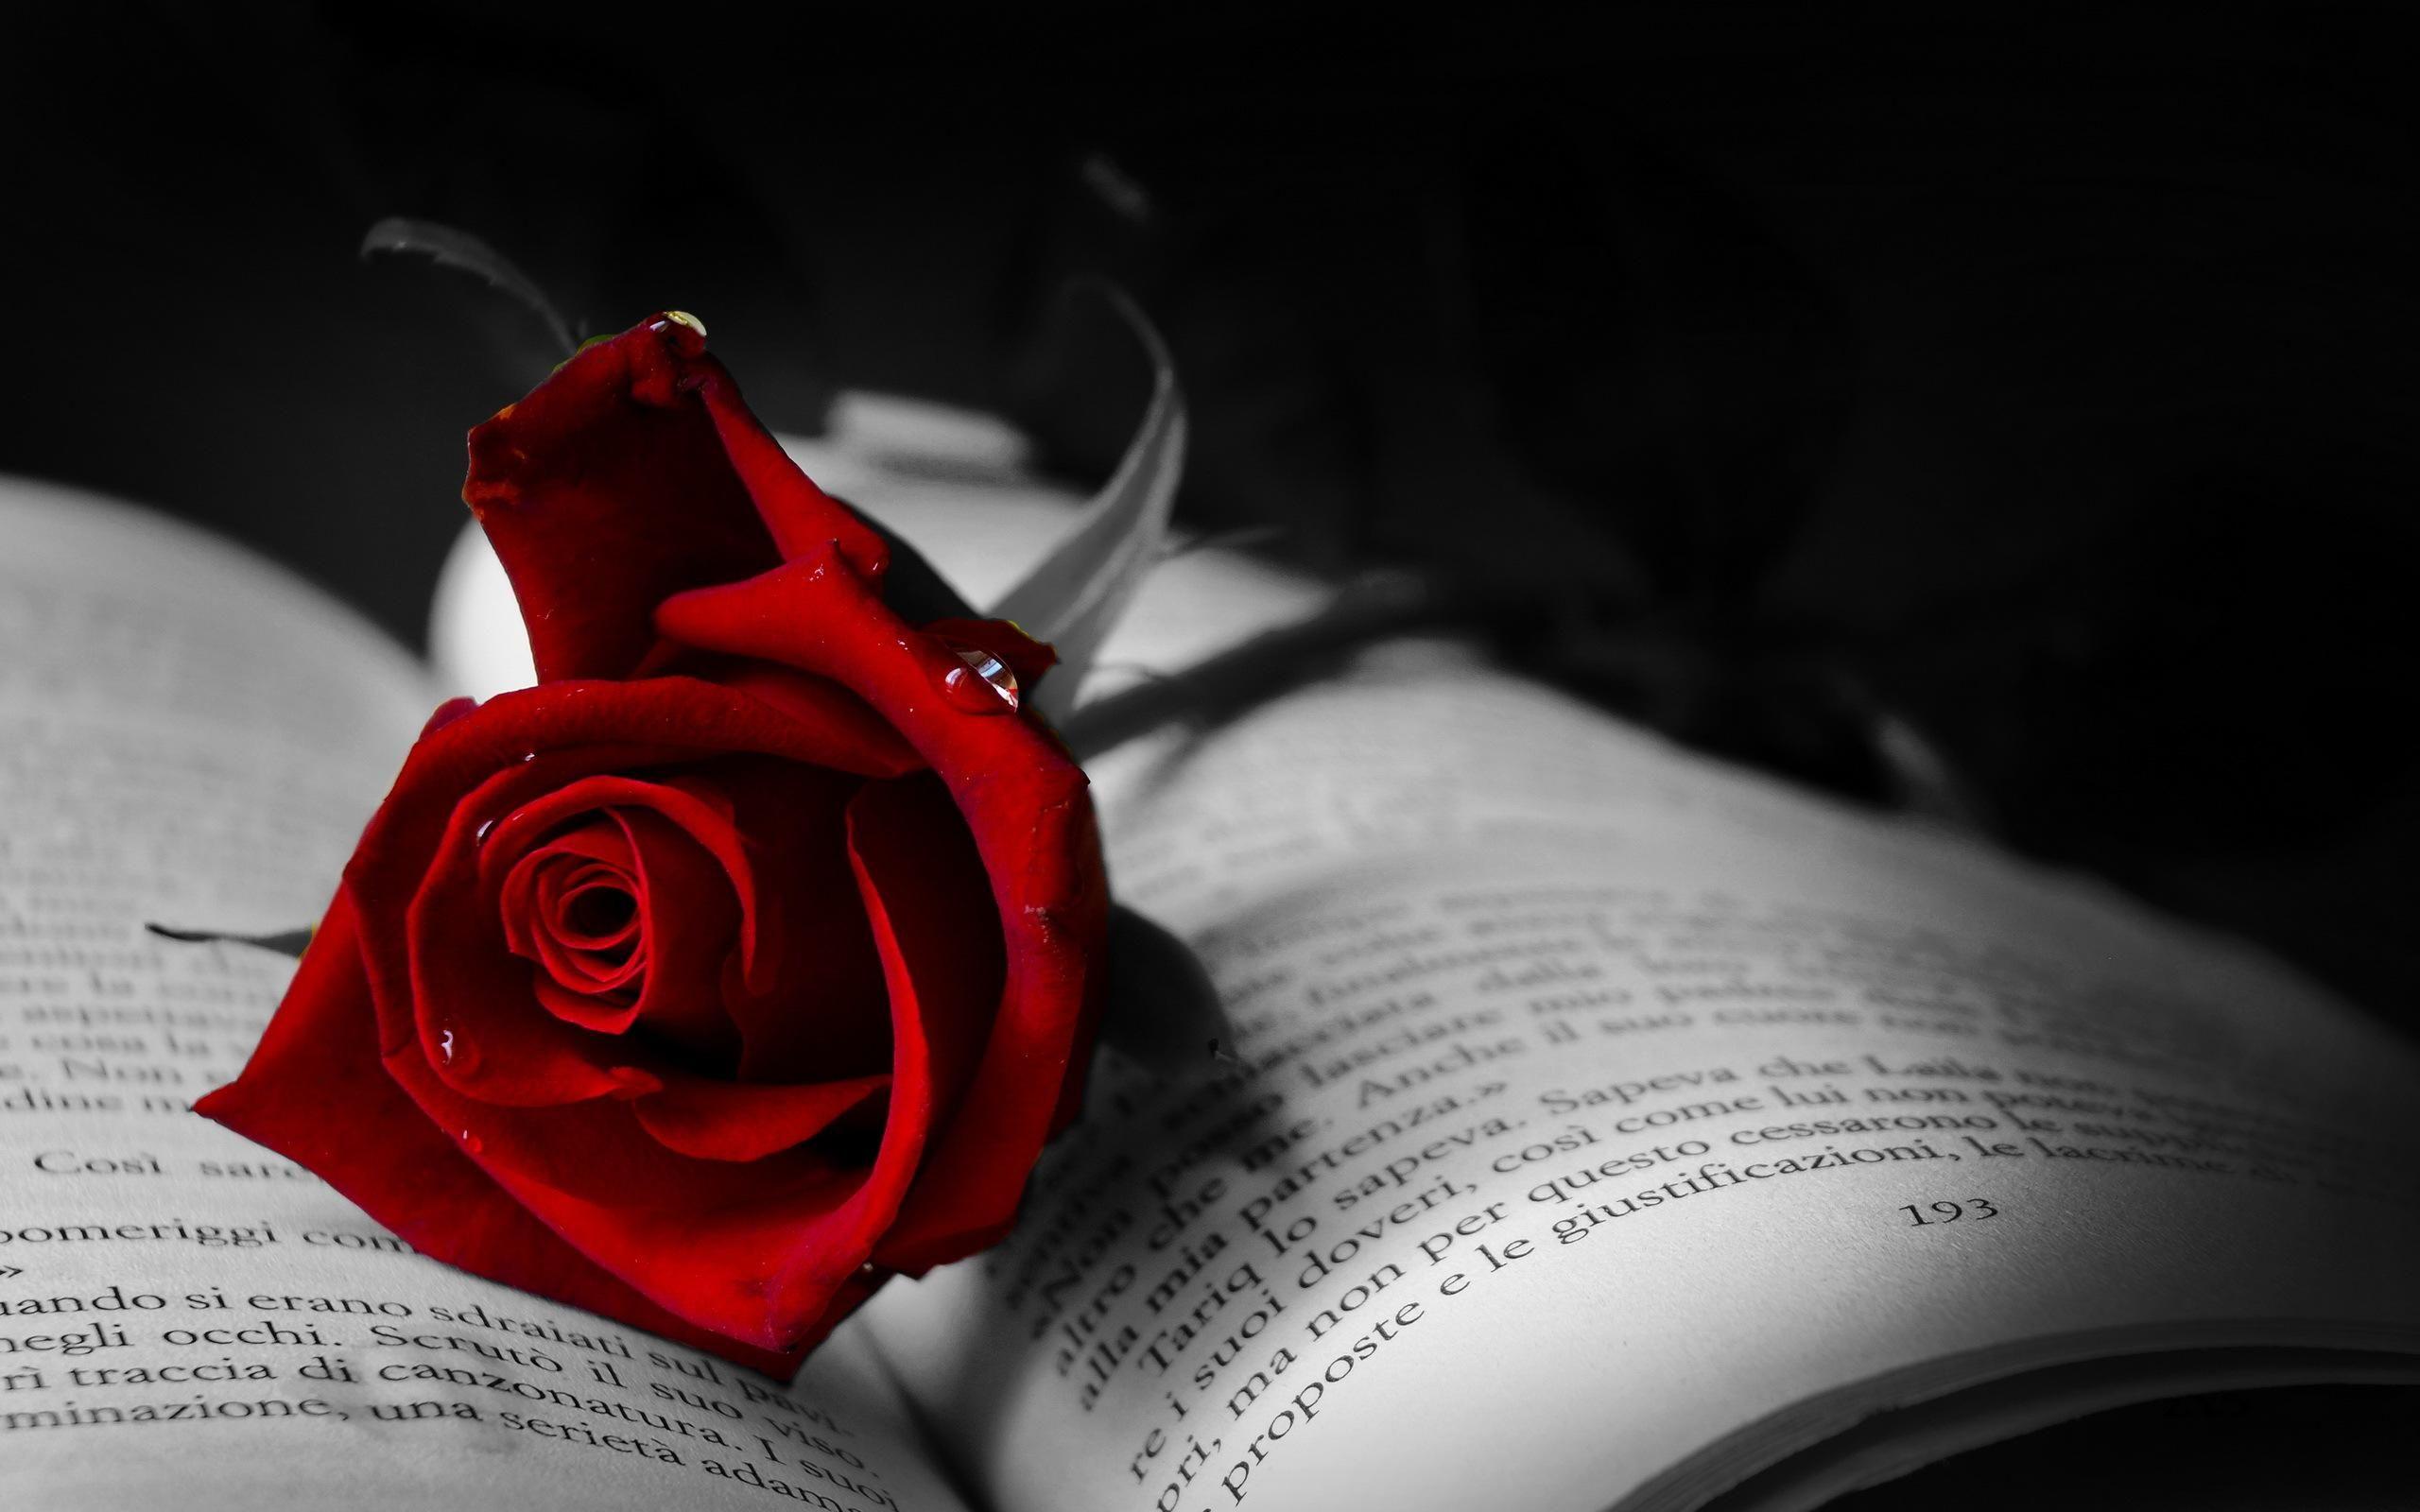 HD Book With Red Rose Wallpaper. Gothic. Rose